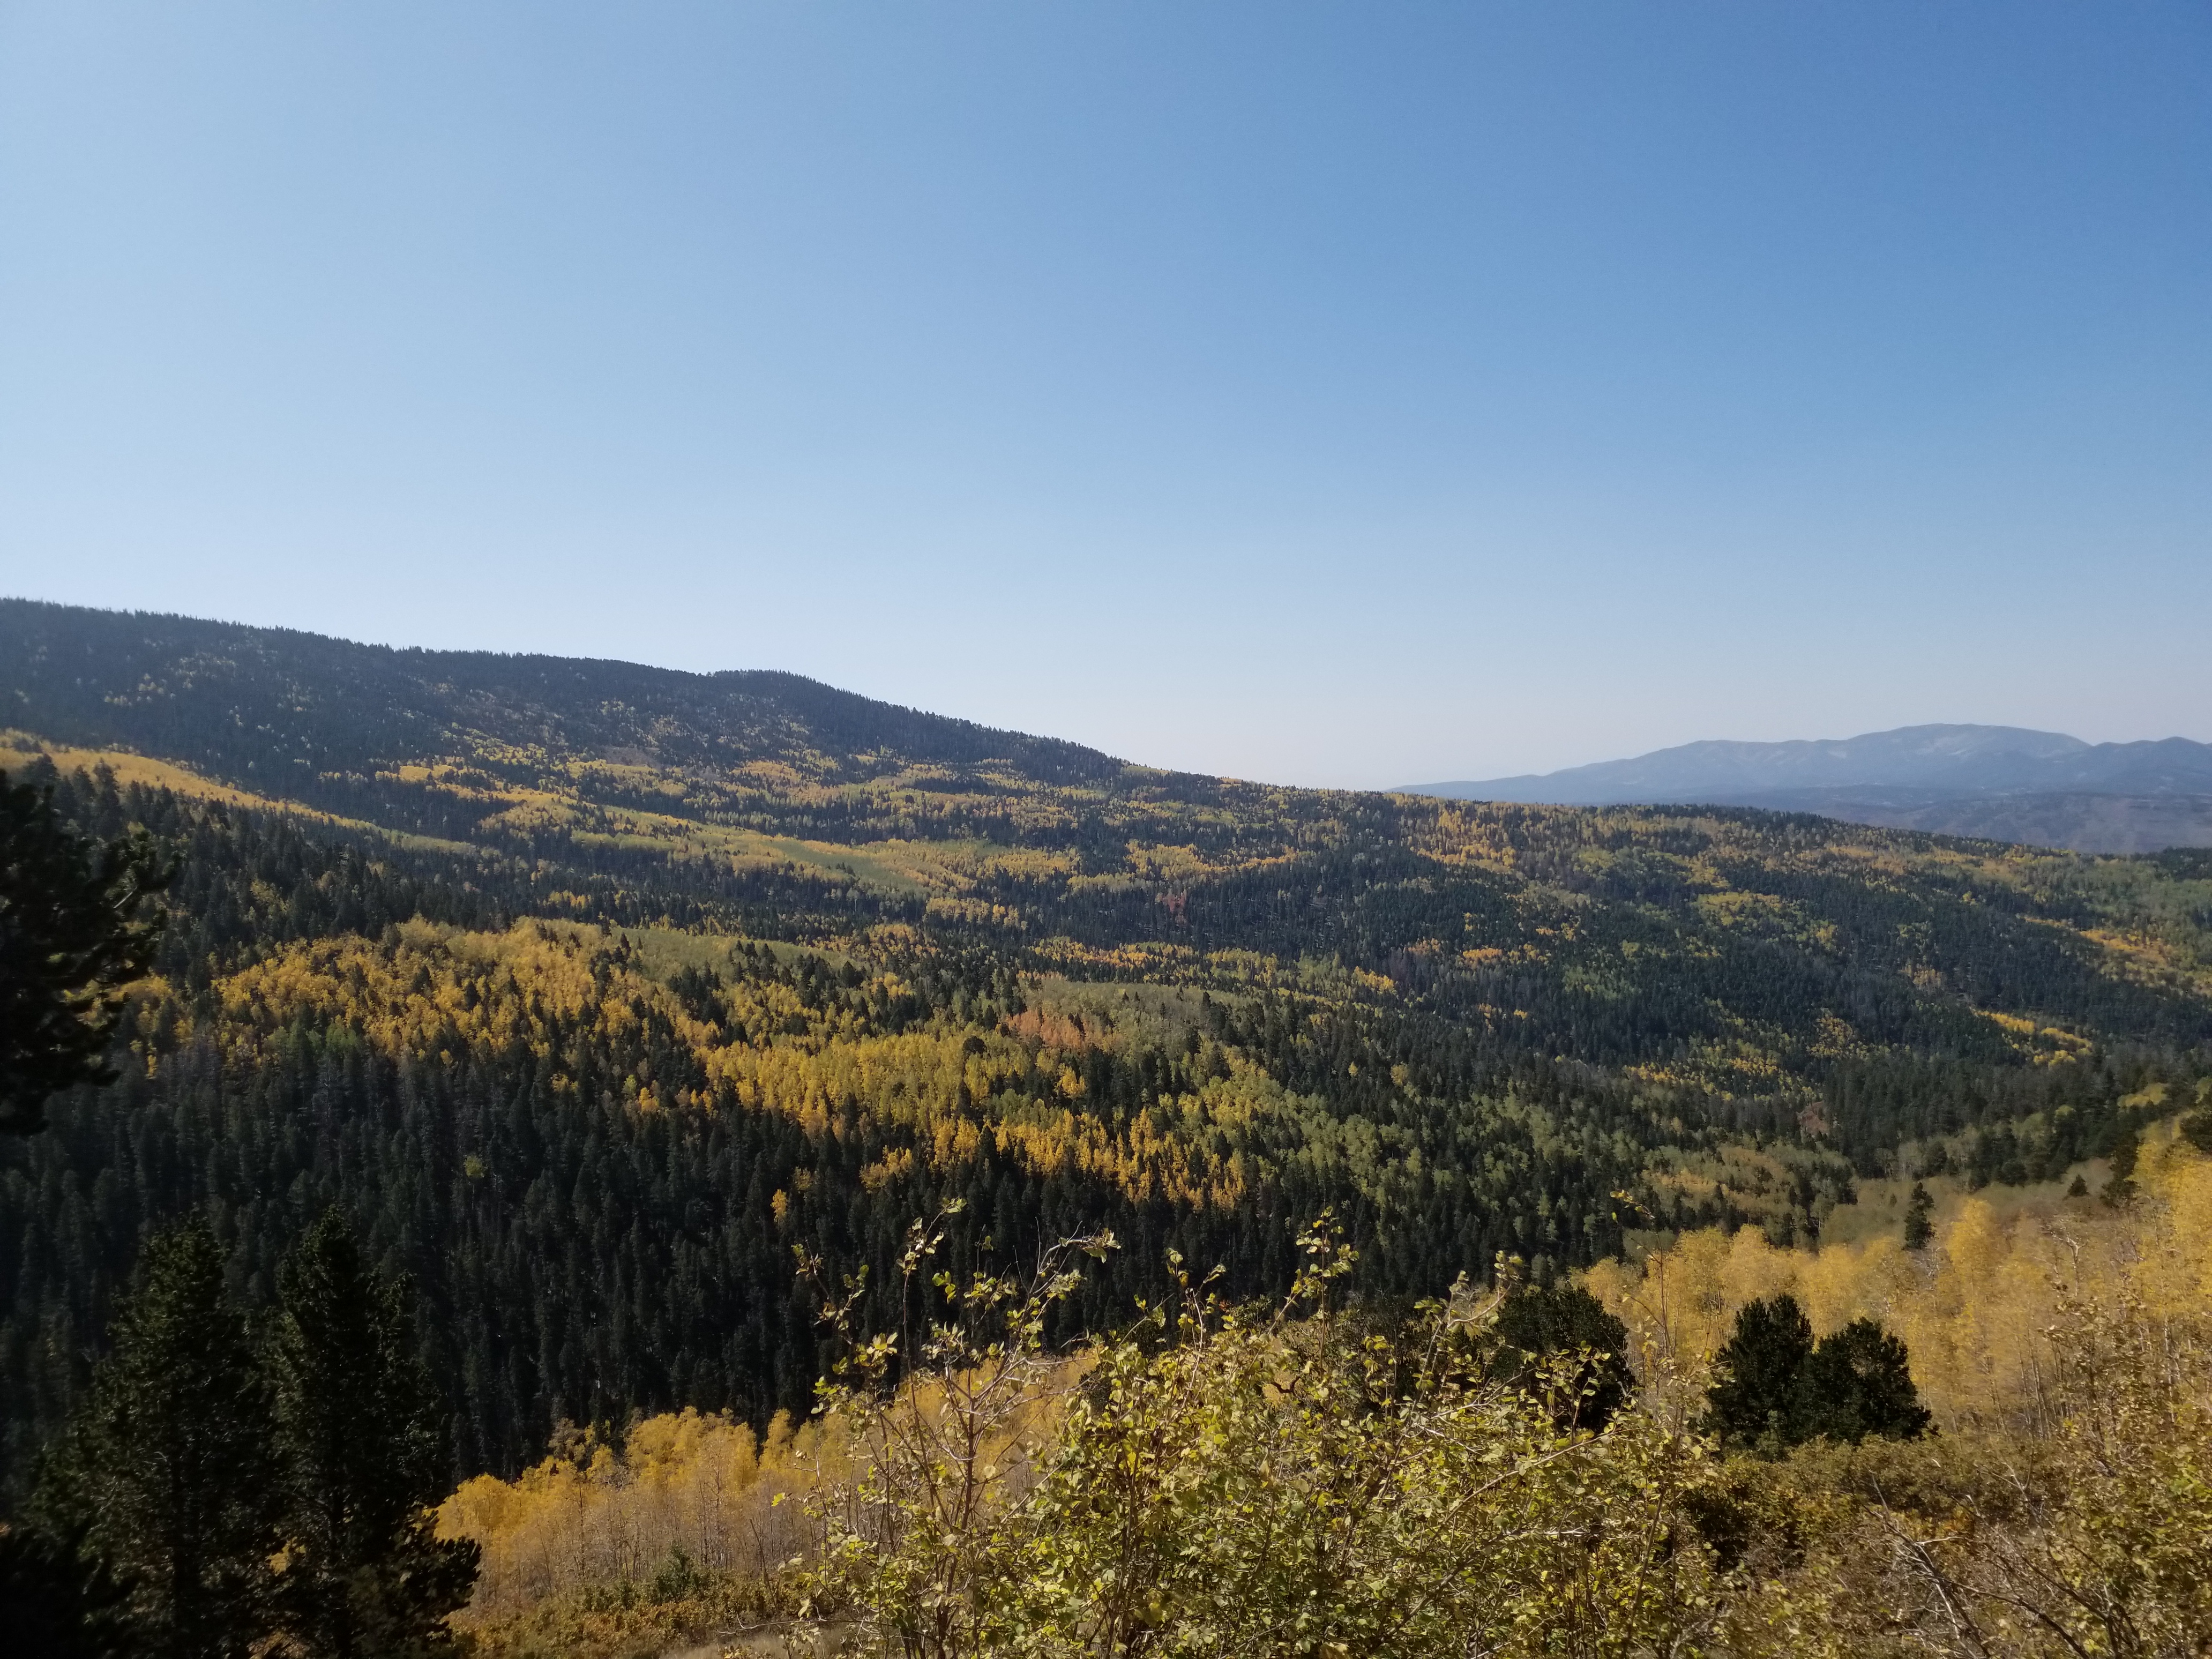 View of a mountain hillside with yellow aspen and pine trees.